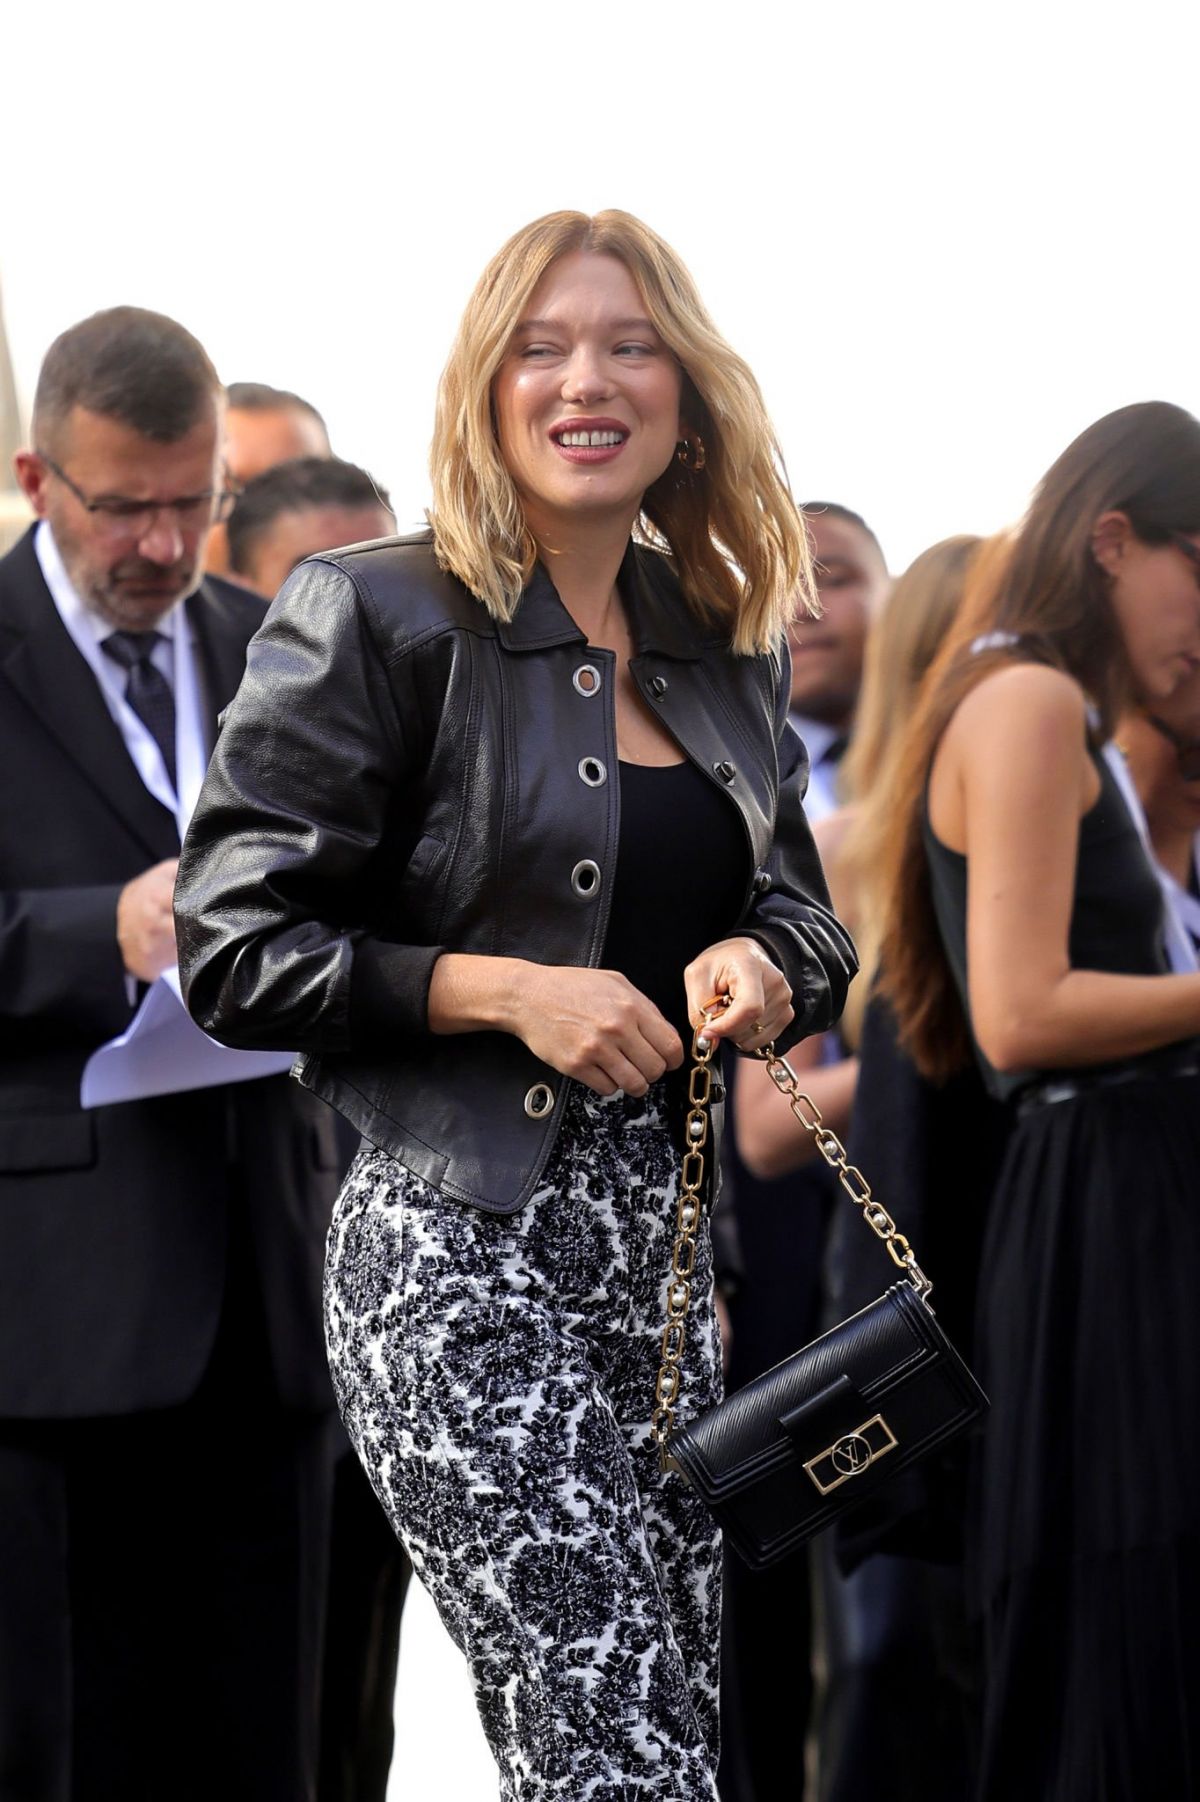 Louis Vuitton – Game On with Léa Seydoux - THE FALL